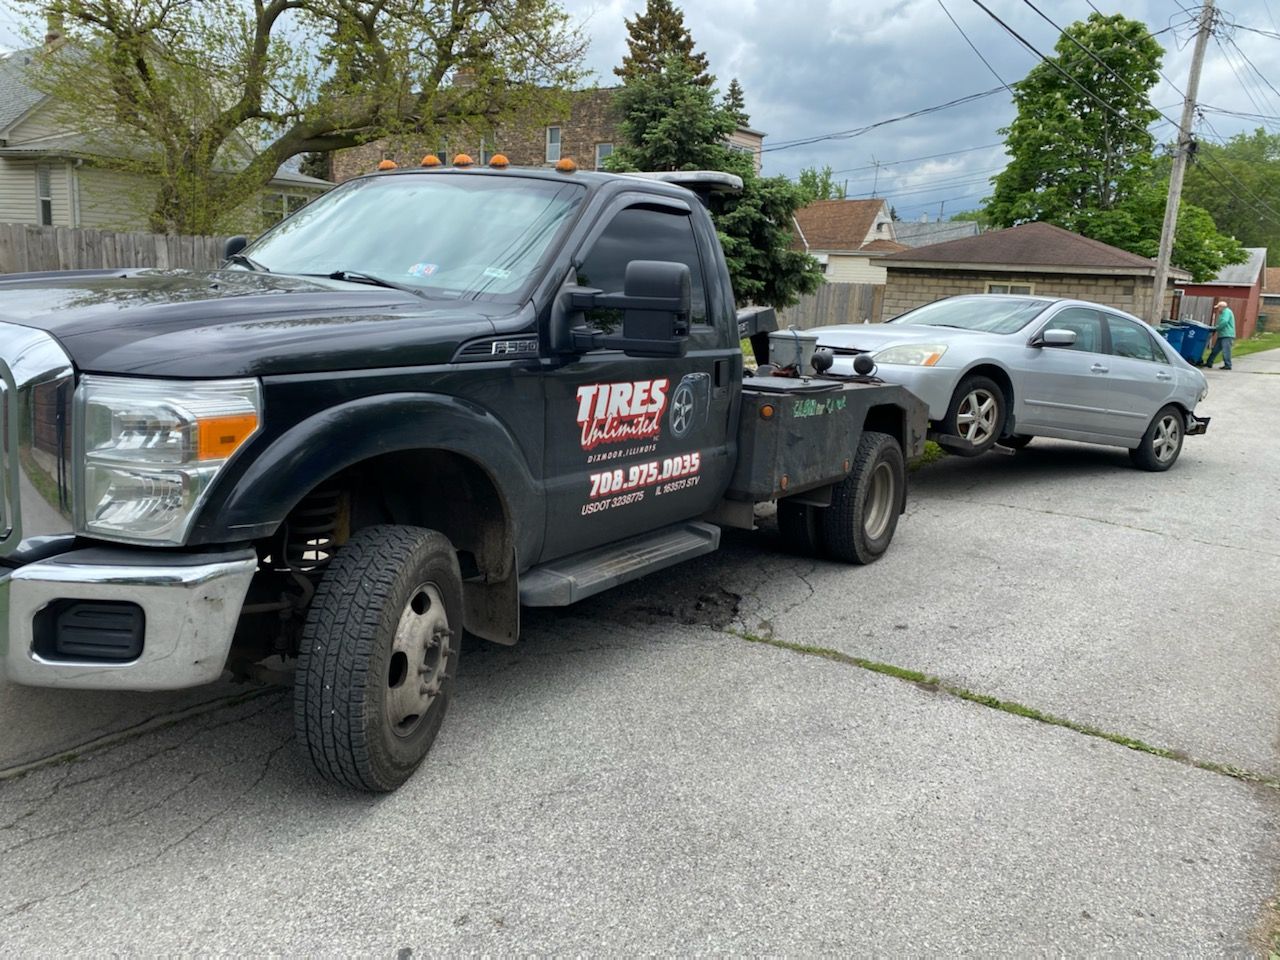 Junk Car Buyer in Palos Heights, IL